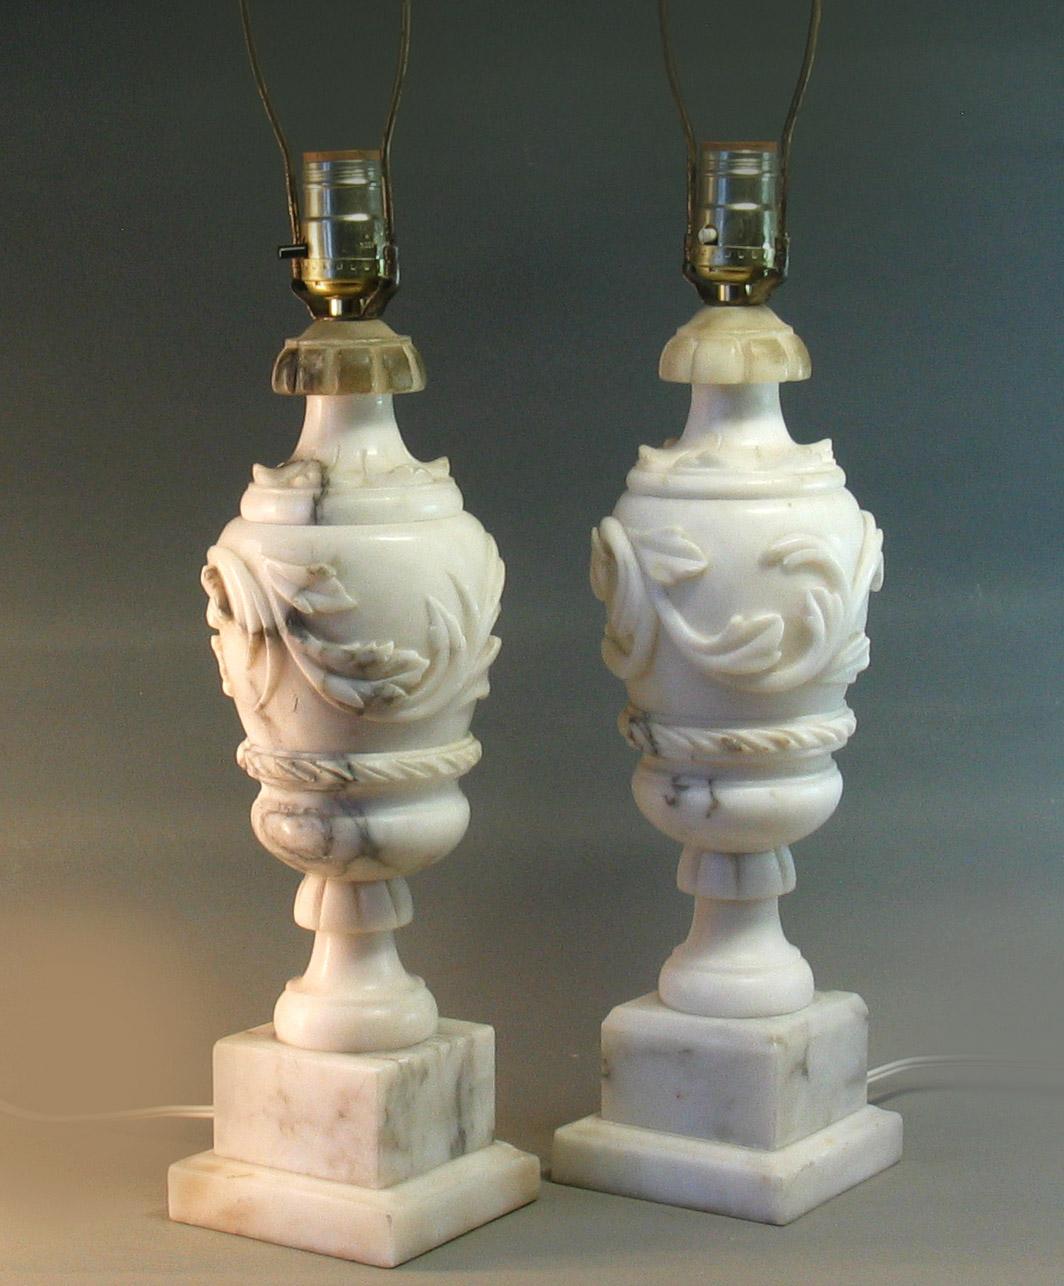 A pair of Italian carved Alabaster table lamps
First half of the 20th century

Of classical urn-form, carved with acanthus, on a square base

Lamps total height: 22 1/2 in.(57.1 cm.) high.
Alabaster urns only: 14 1/4 in.(36.2 cm.)
Base: 4 1/4